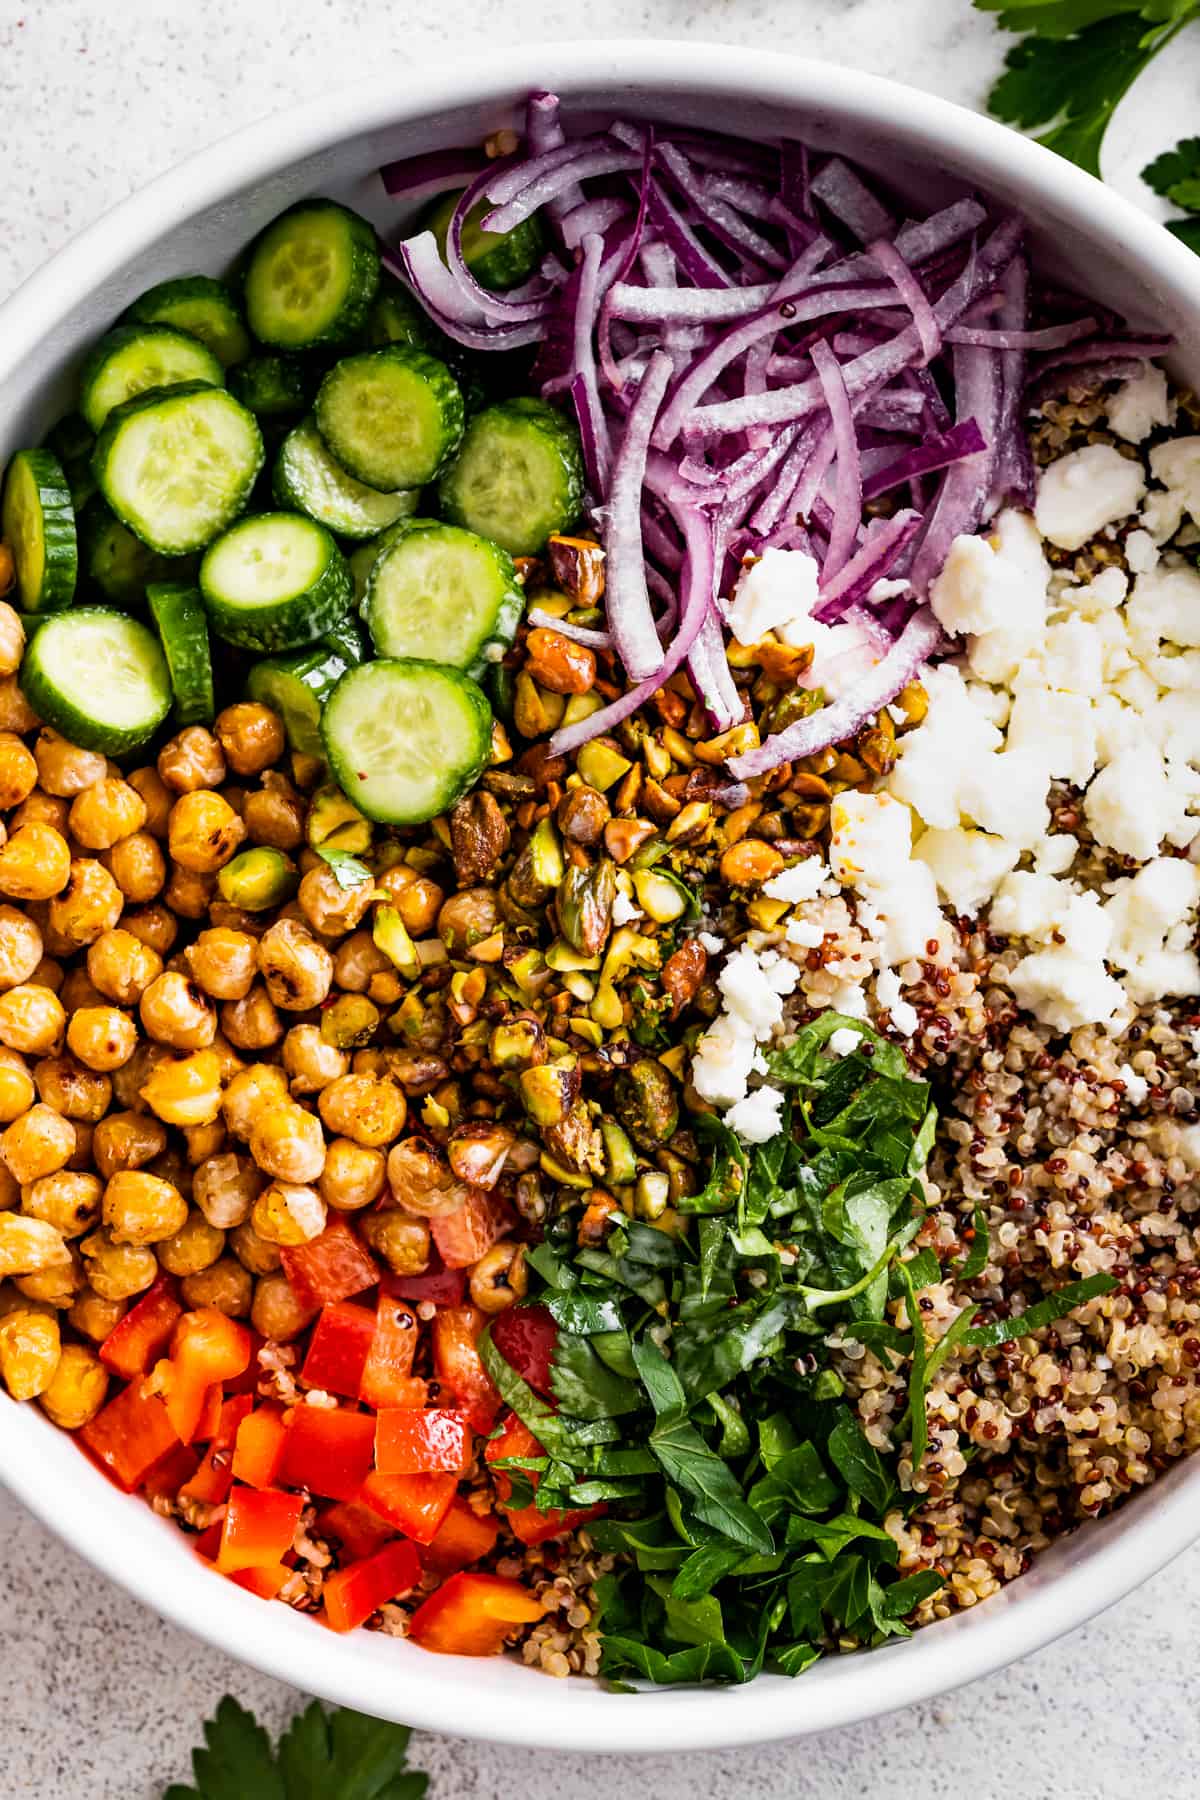 A large bowl with sliced cucumbers, sliced red onions, chickpeas, diced red bell peppers, herbs, tri-colored quinoa, and crumbles of feta cheese.